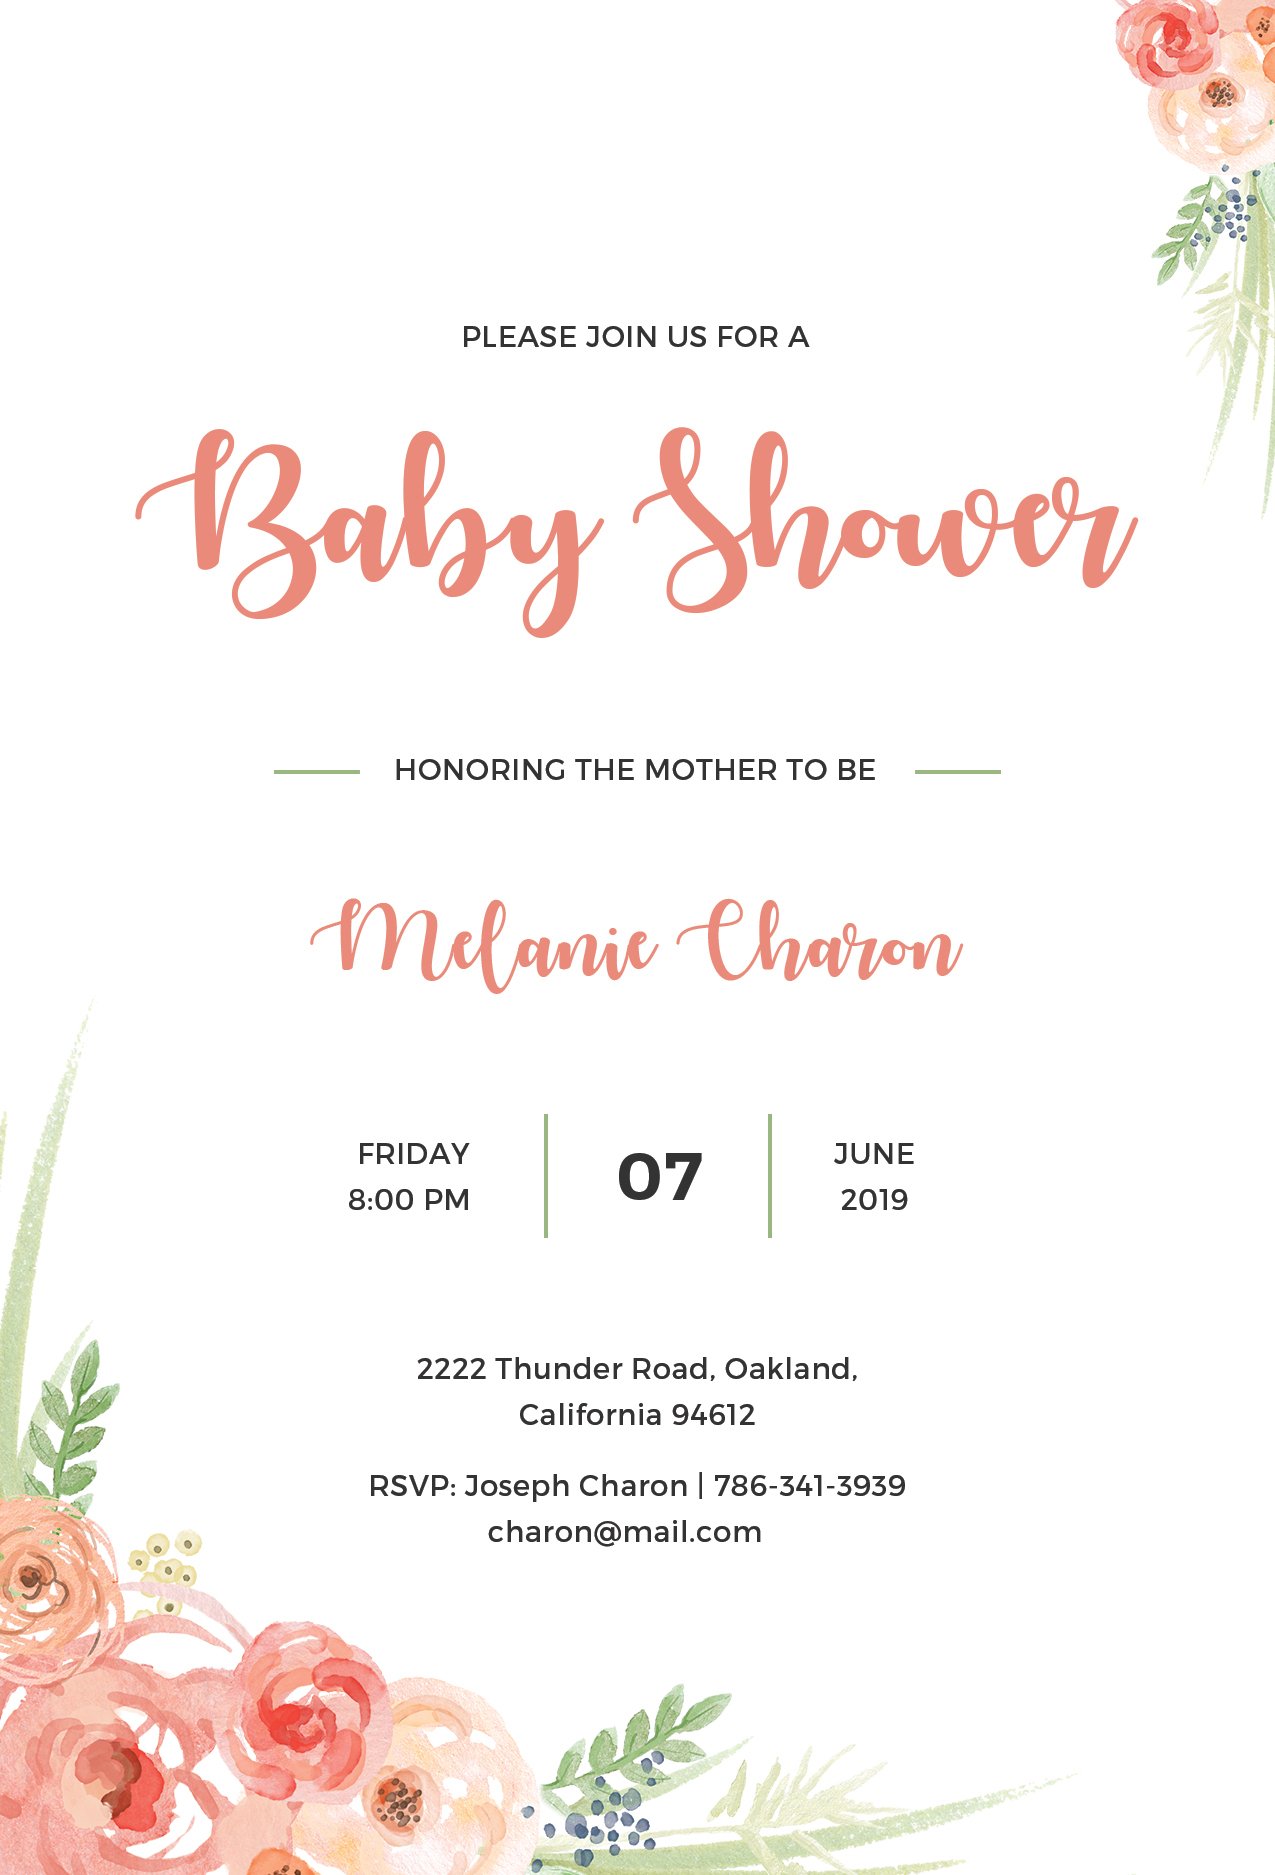 free-baby-shower-invitation-template-in-psd-ms-word-publisher-illustrator-indesign-apple